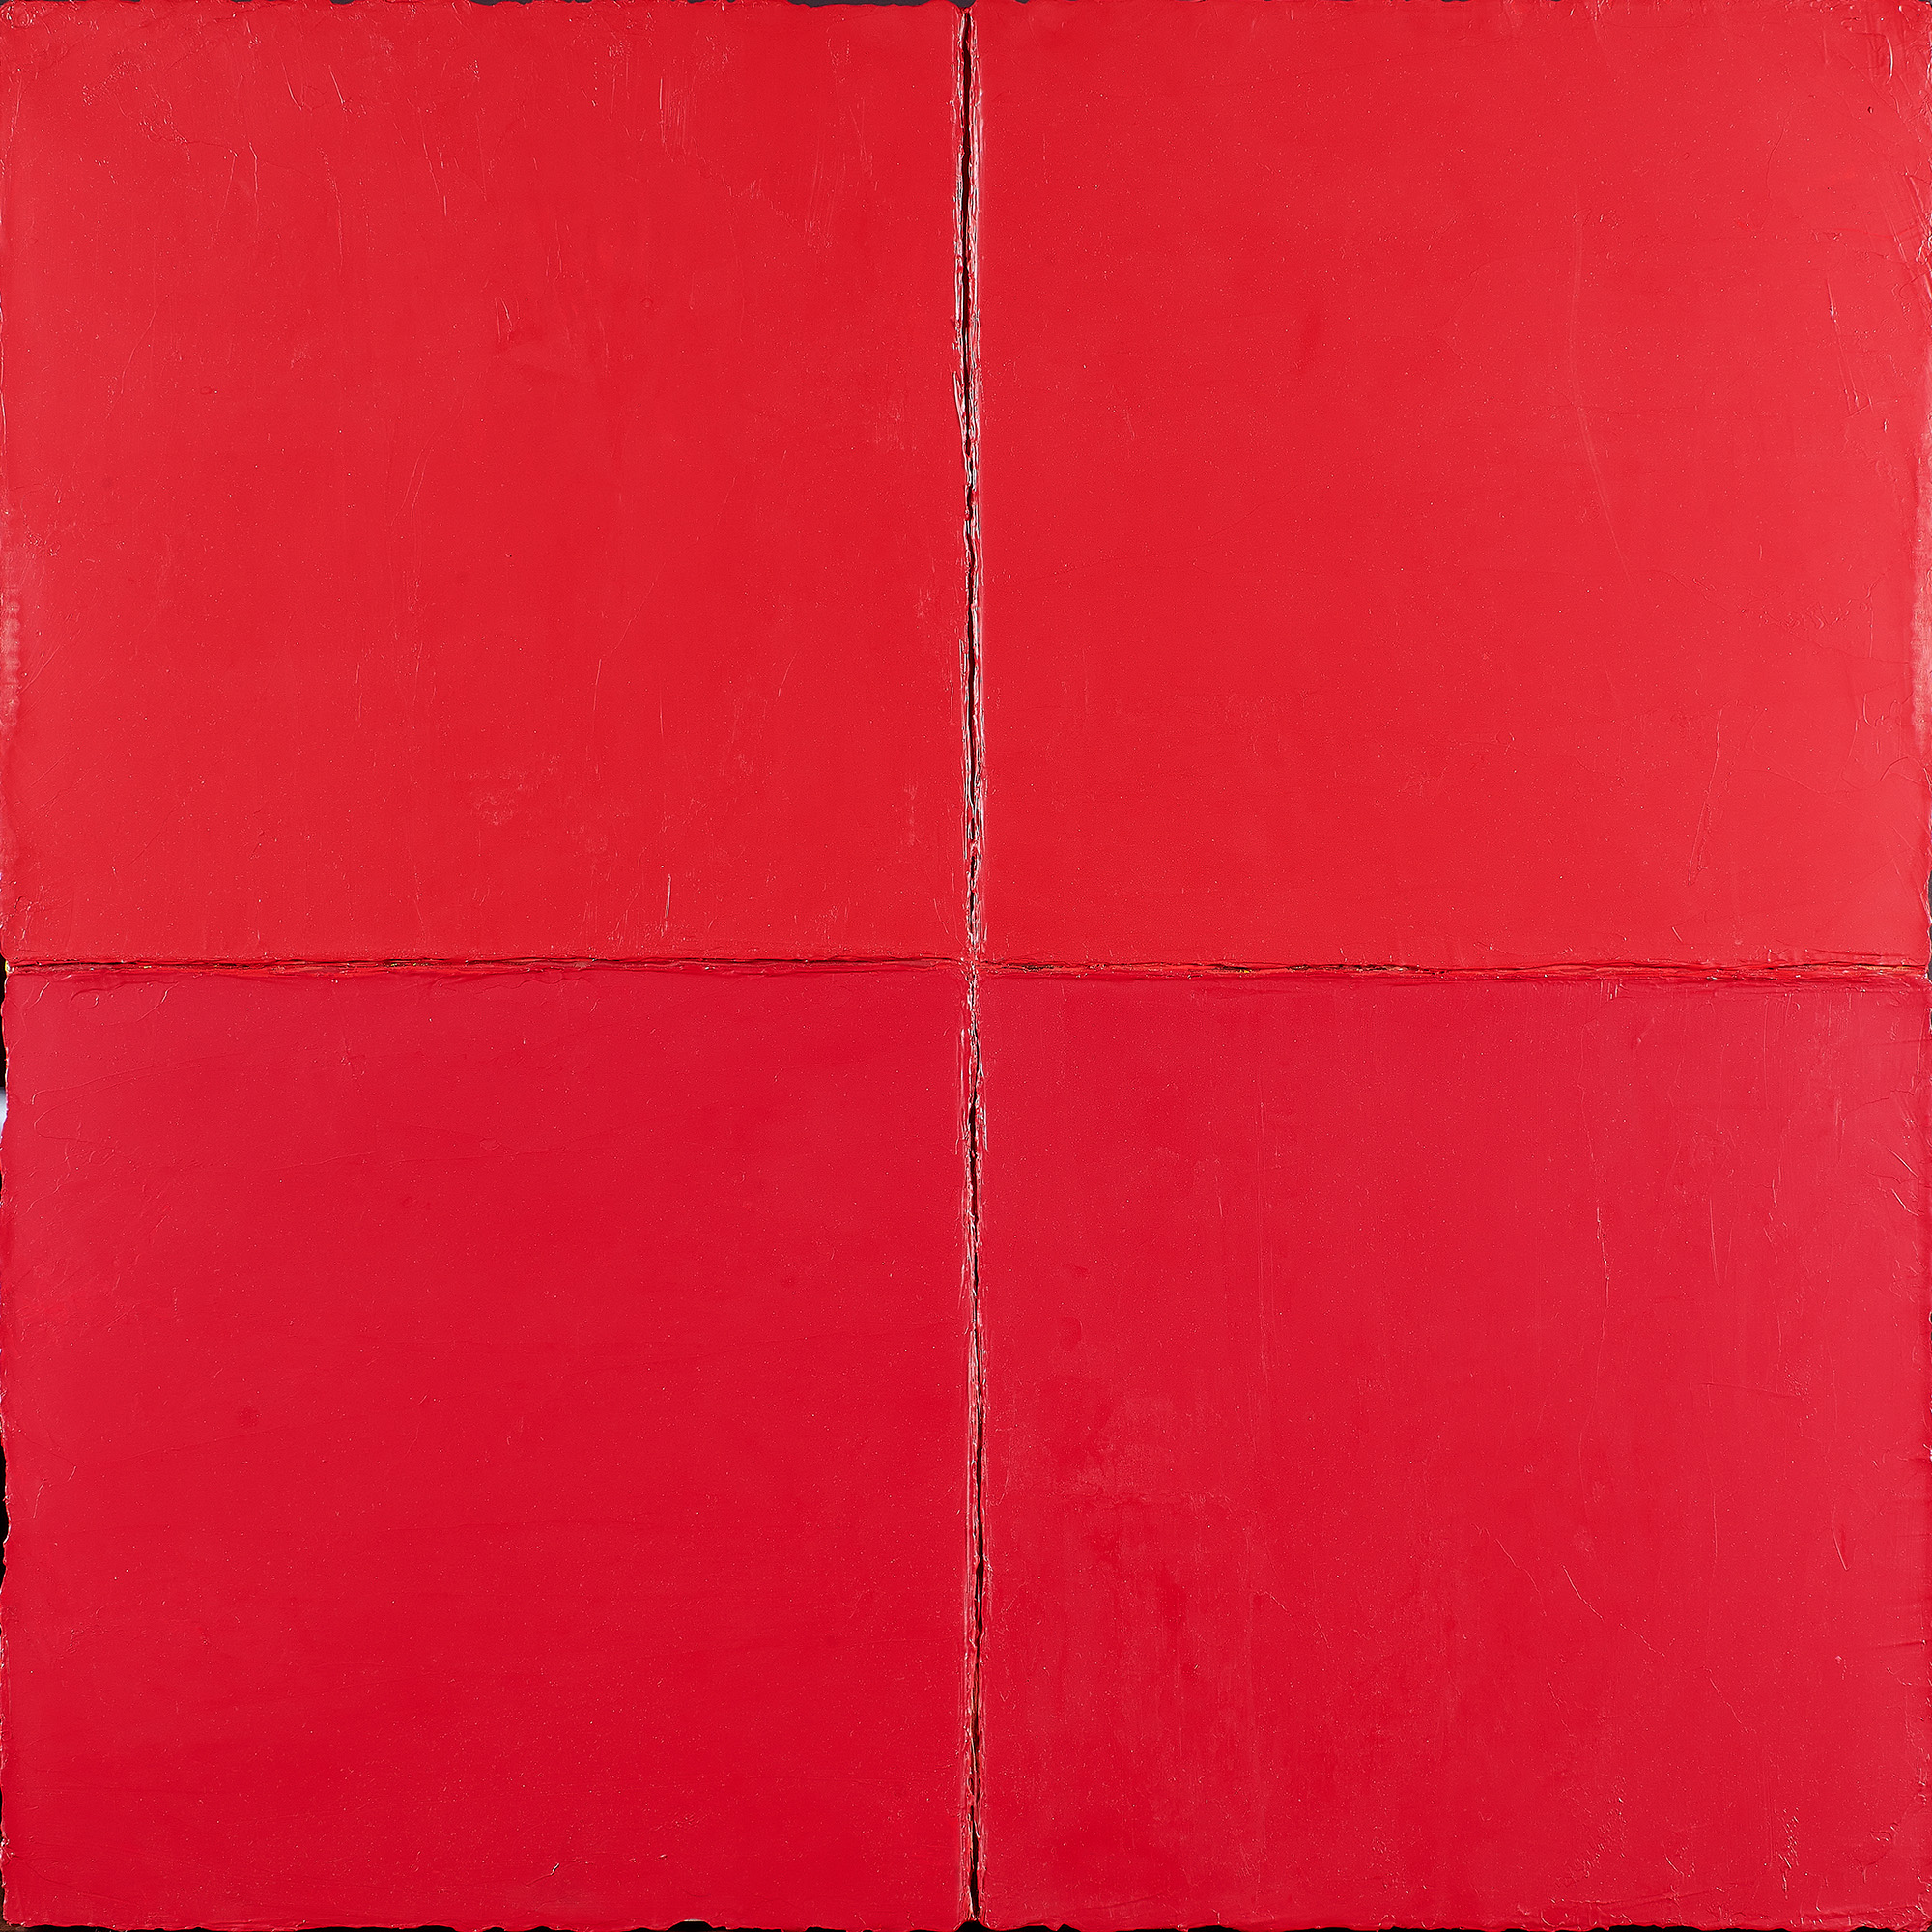 Kazuko Inoue (Japanese, b. 1946), <em>Untitled (Red Squares)</em>, 2008, acrylic on linen, 32″ x 32″. Provenance: Acquired by descent from the Estate of Allan Stone.